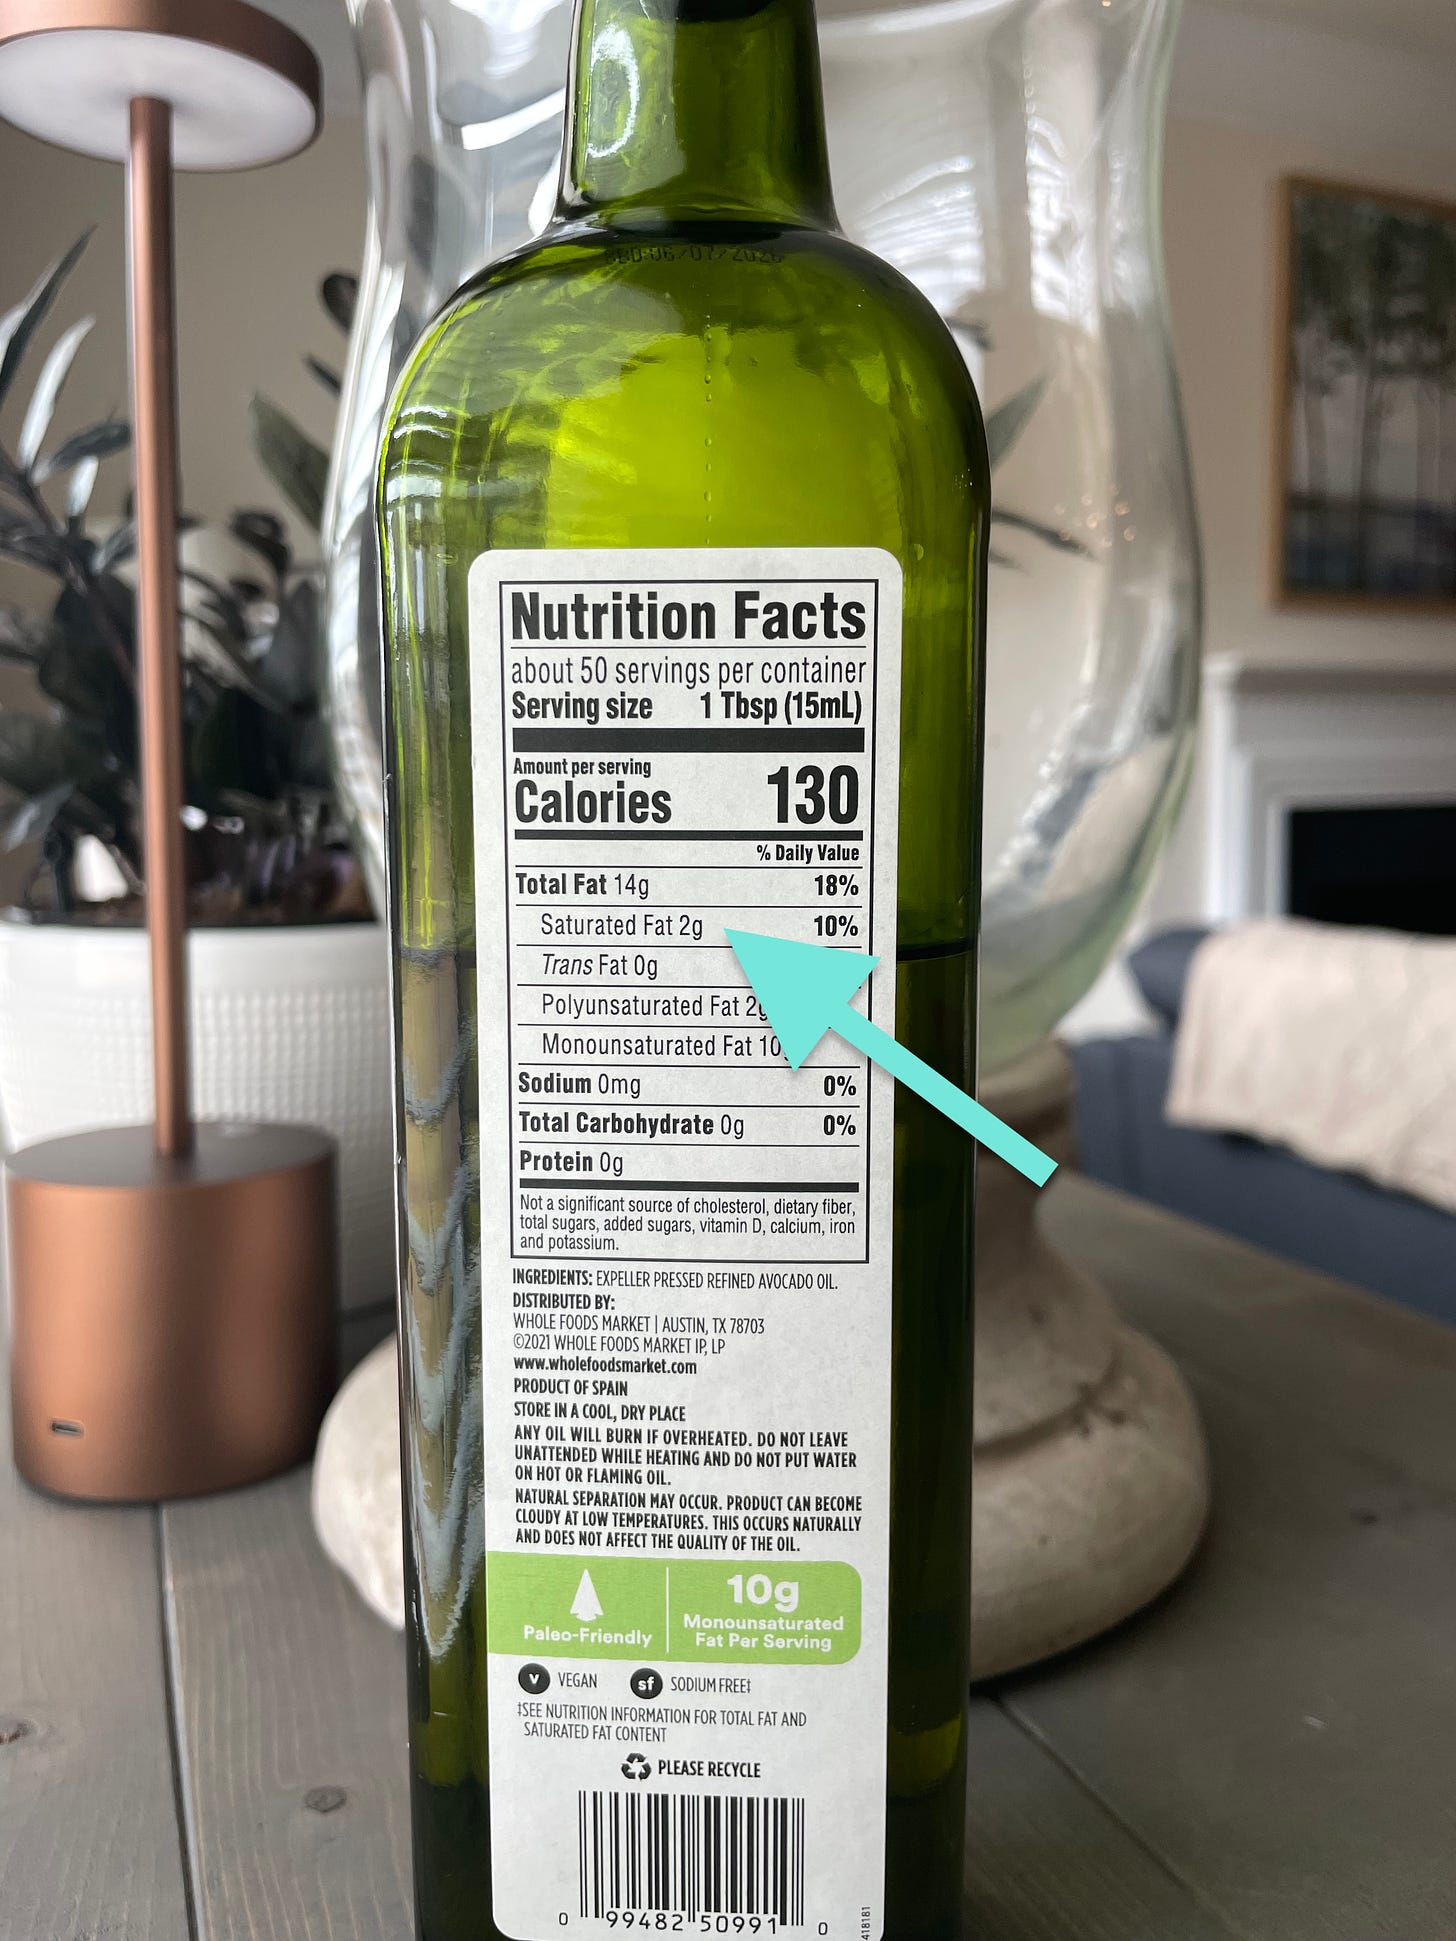 Avocado oil nutrition highlighting saturated fat 